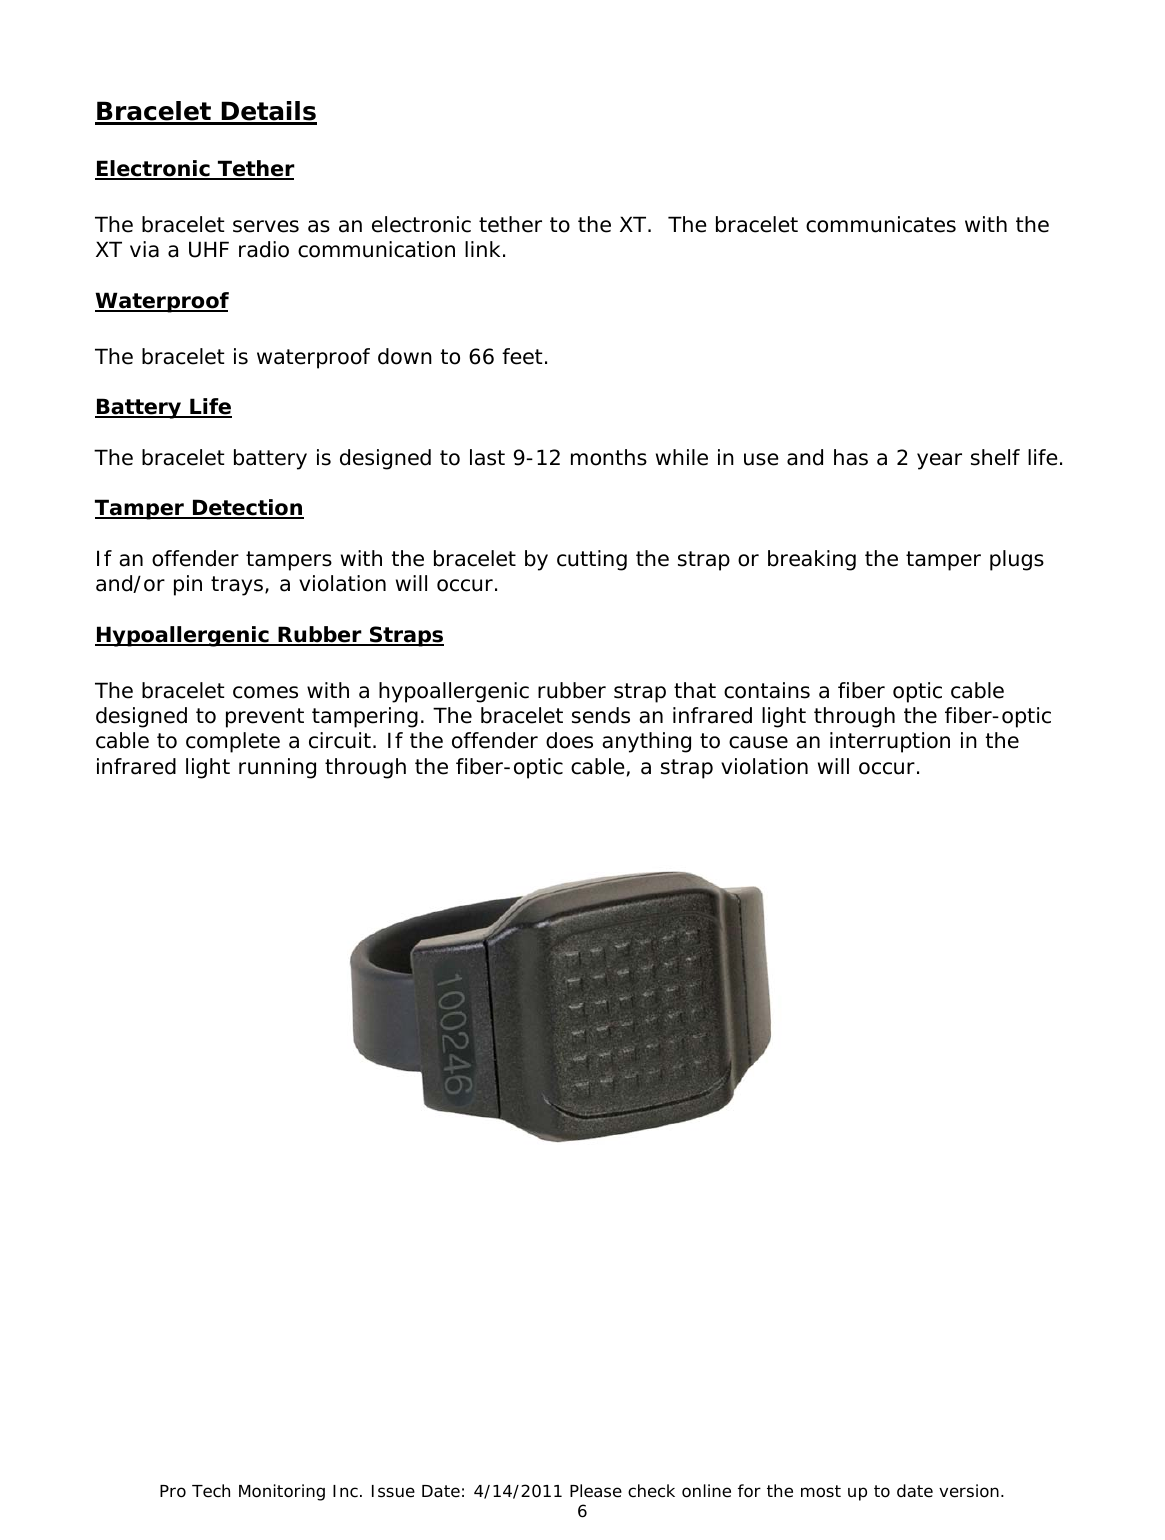 Pro Tech Monitoring Inc. Issue Date: 4/14/2011 Please check online for the most up to date version. 6  Bracelet Details   Electronic Tether  The bracelet serves as an electronic tether to the XT.  The bracelet communicates with the XT via a UHF radio communication link.  Waterproof  The bracelet is waterproof down to 66 feet.  Battery Life  The bracelet battery is designed to last 9-12 months while in use and has a 2 year shelf life.  Tamper Detection  If an offender tampers with the bracelet by cutting the strap or breaking the tamper plugs and/or pin trays, a violation will occur.   Hypoallergenic Rubber Straps  The bracelet comes with a hypoallergenic rubber strap that contains a fiber optic cable designed to prevent tampering. The bracelet sends an infrared light through the fiber-optic cable to complete a circuit. If the offender does anything to cause an interruption in the infrared light running through the fiber-optic cable, a strap violation will occur.     